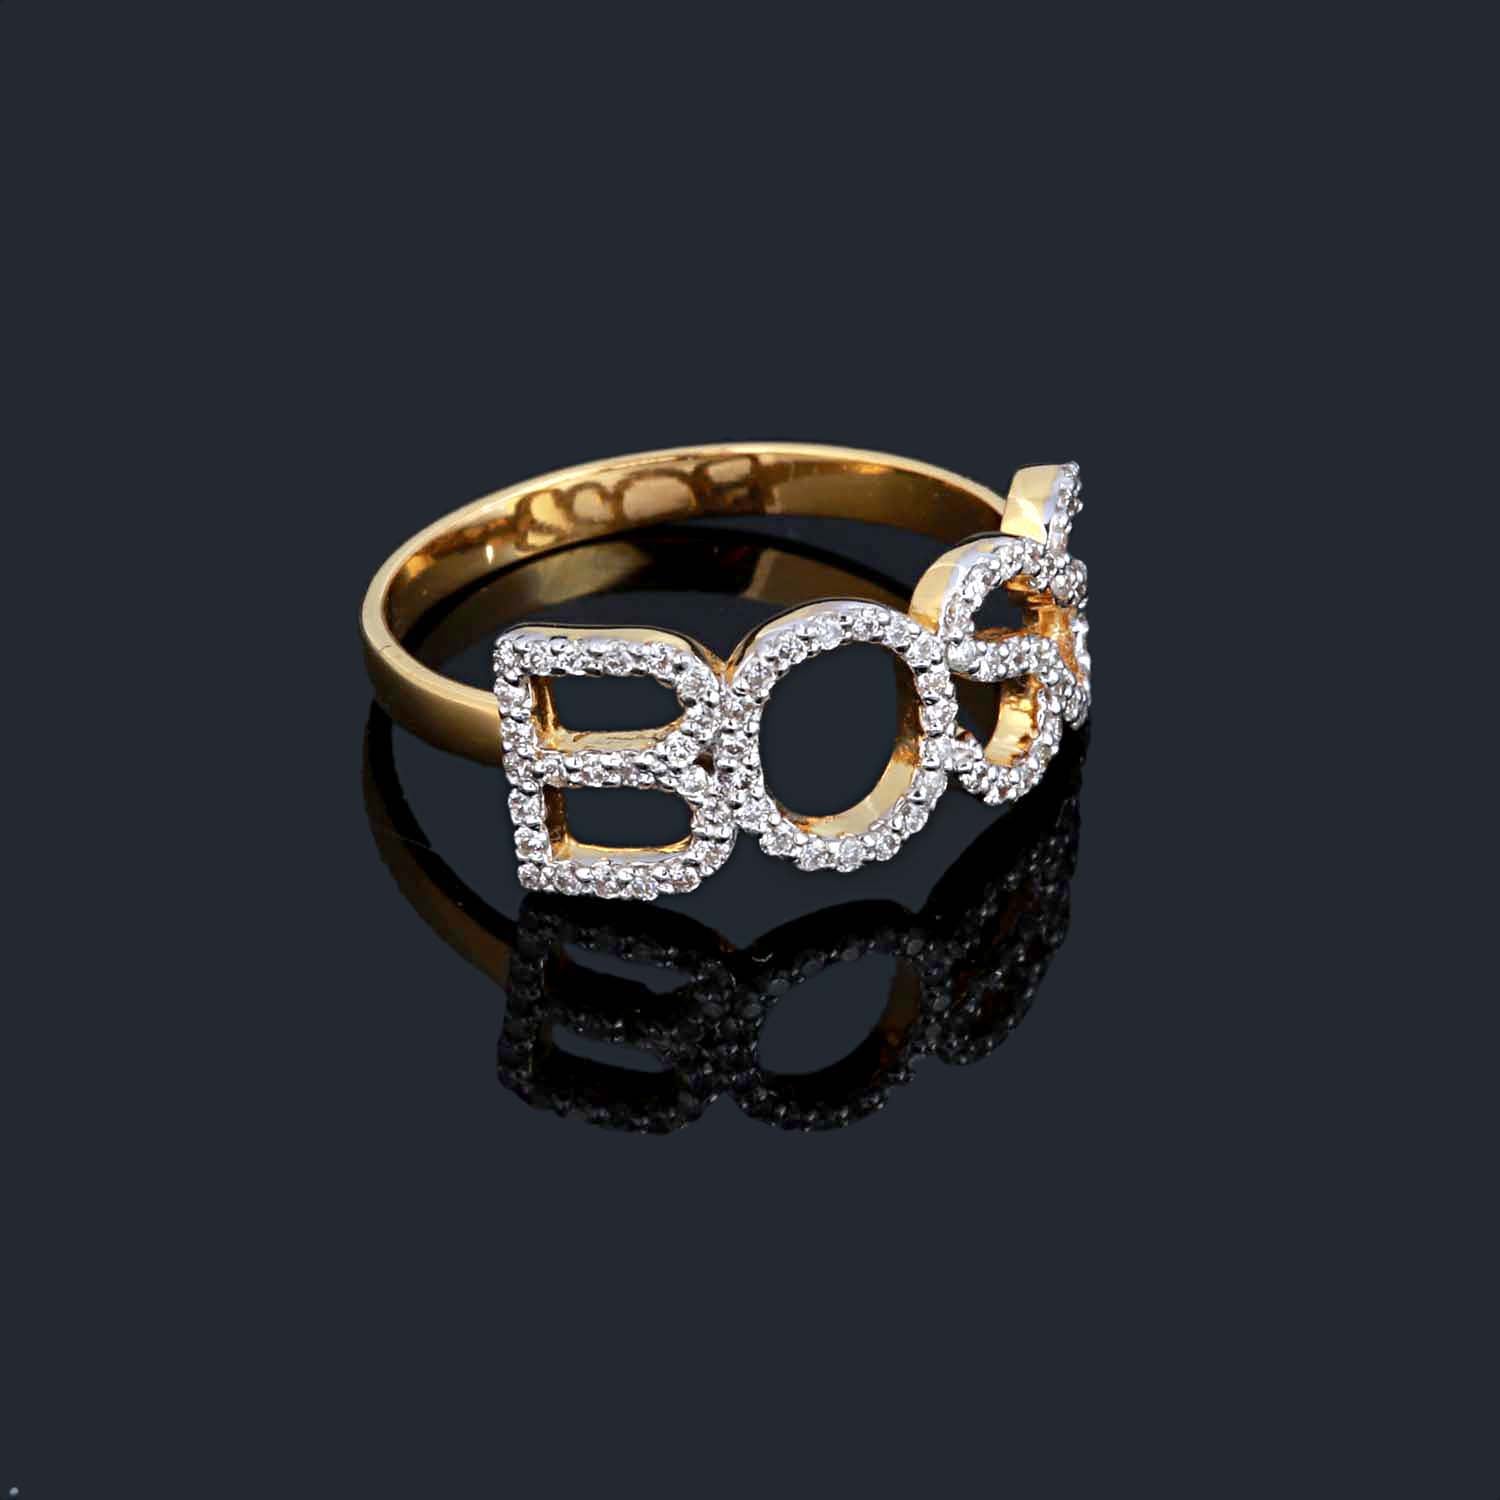 14k Yellow Gold Ring With Diamonds